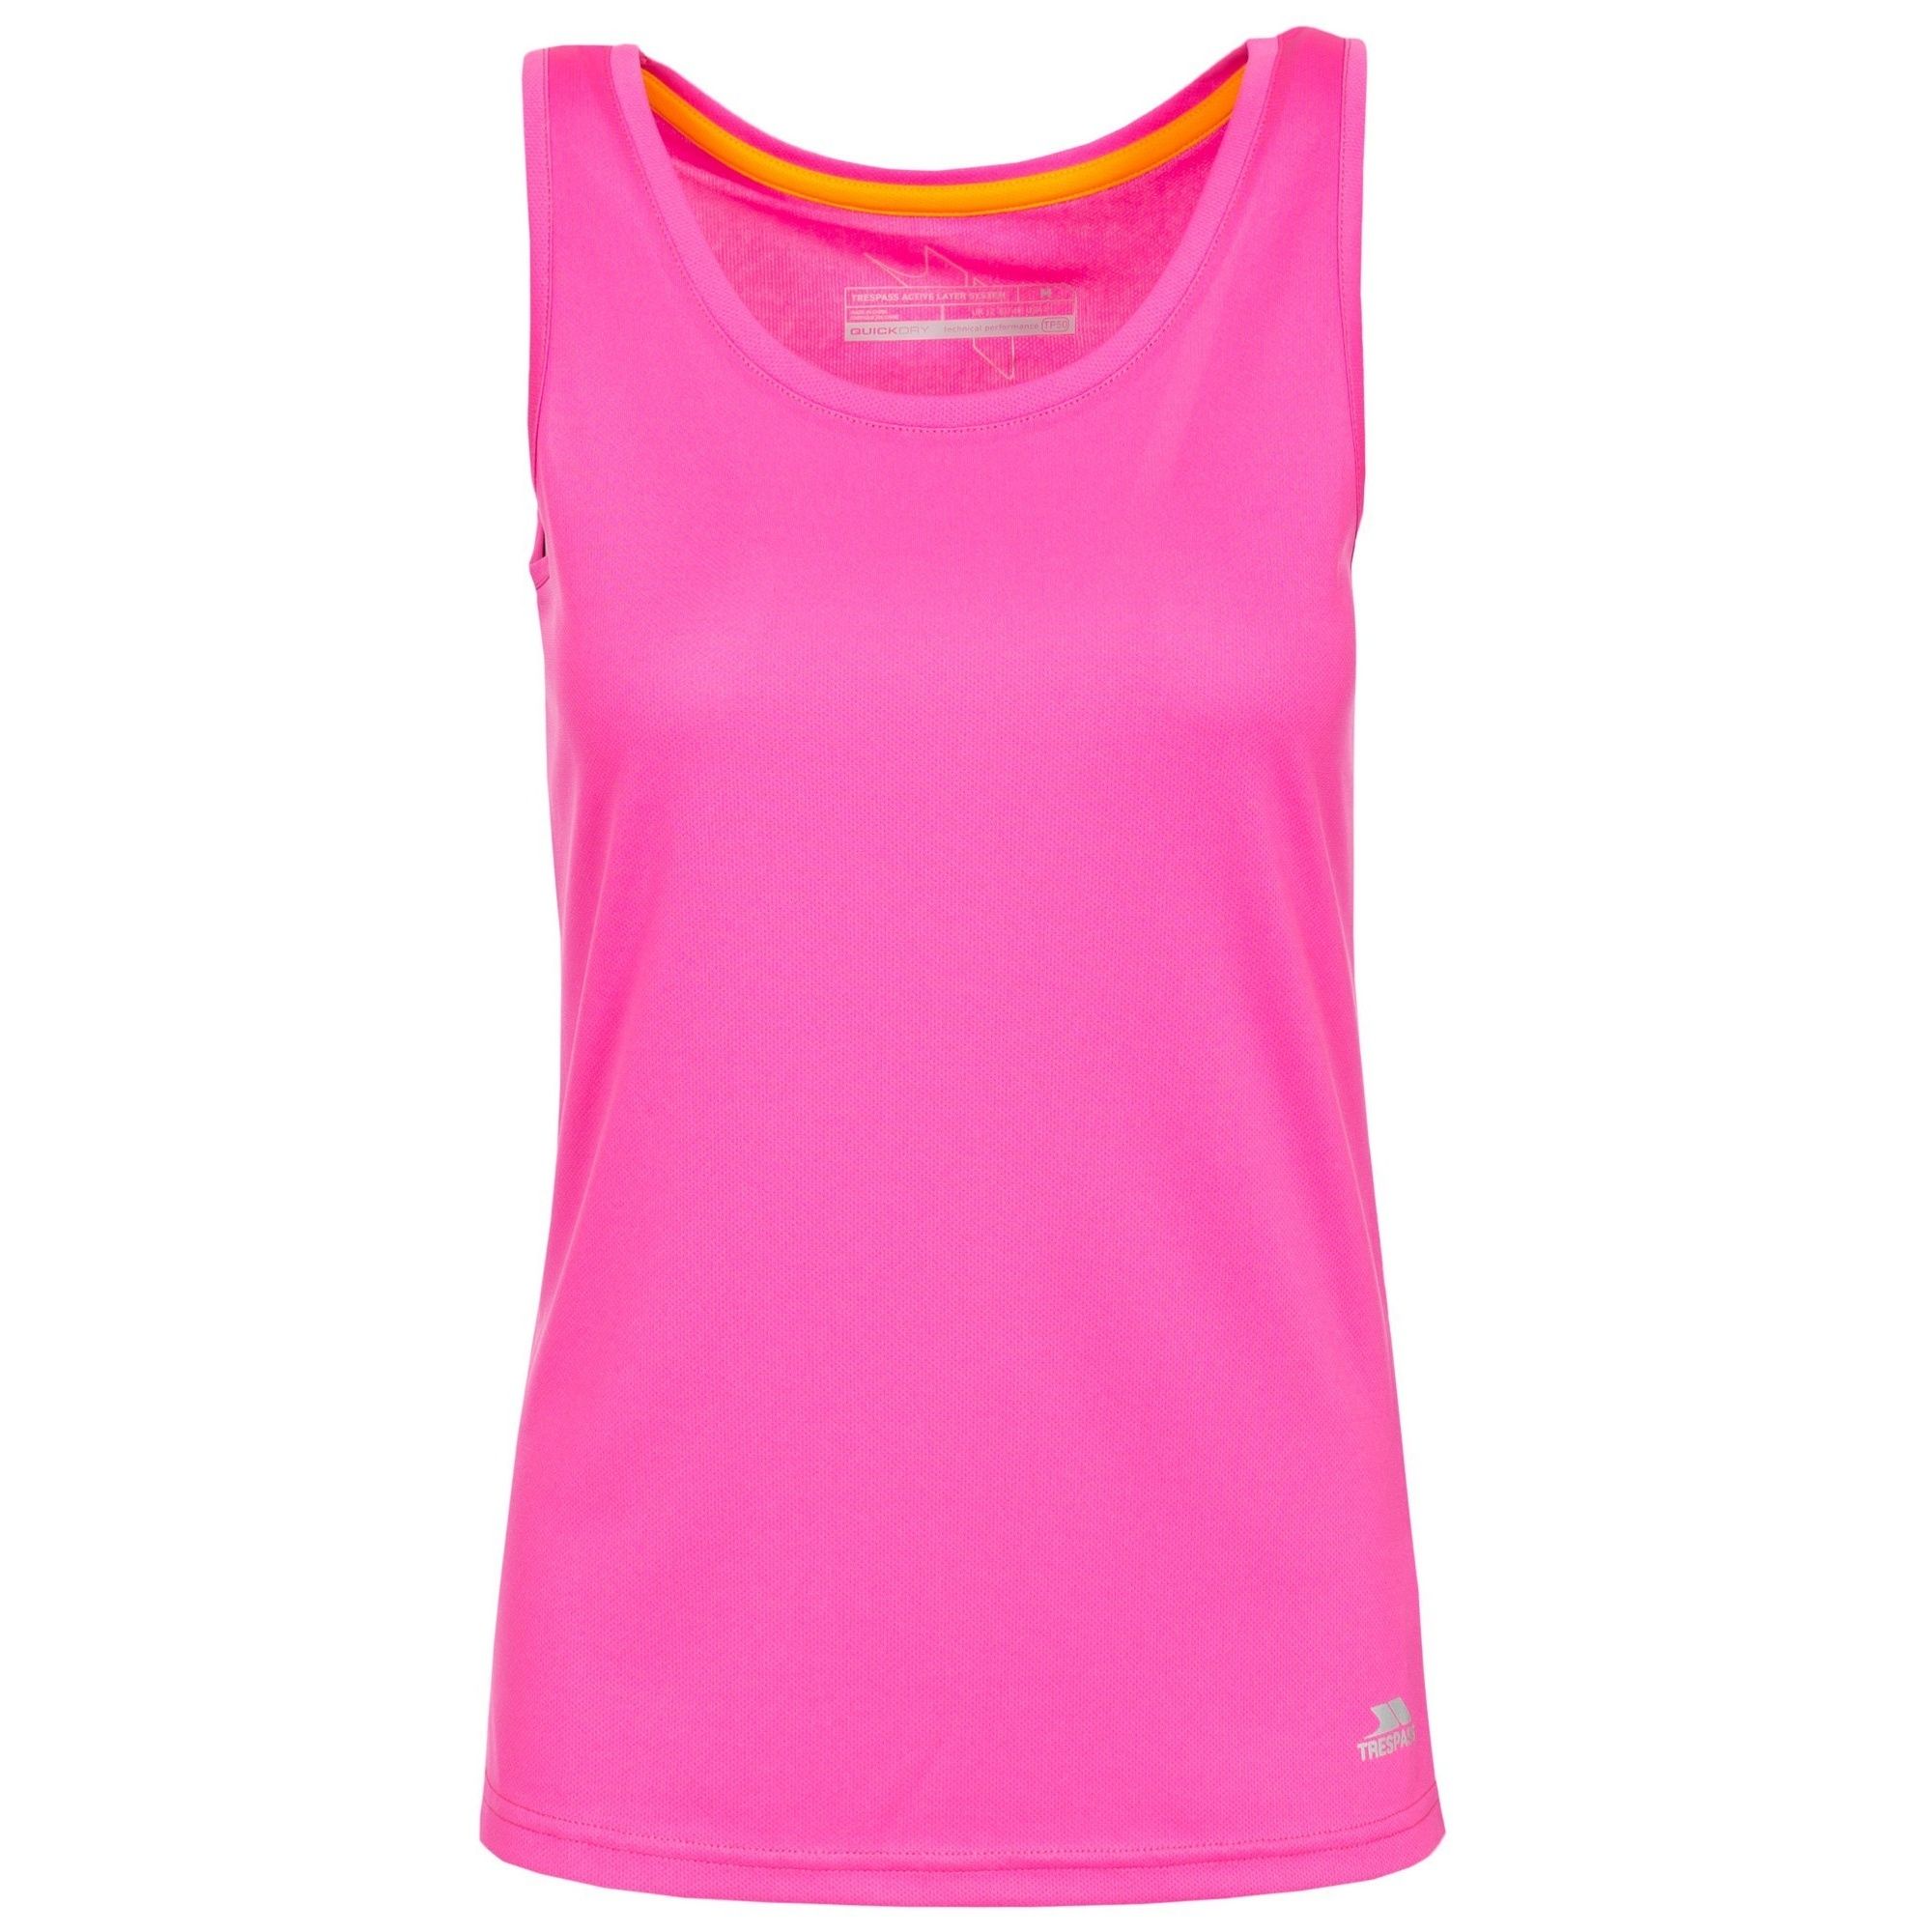 Vest top with reflective Trespass prints. Contrast inner back neck binding. Quick dry. 100% polyester. Trespass Womens Chest Sizing (approx): XS/8 - 32in/81cm, S/10 - 34in/86cm, M/12 - 36in/91.4cm, L/14 - 38in/96.5cm, XL/16 - 40in/101.5cm, XXL/18 - 42in/106.5cm.